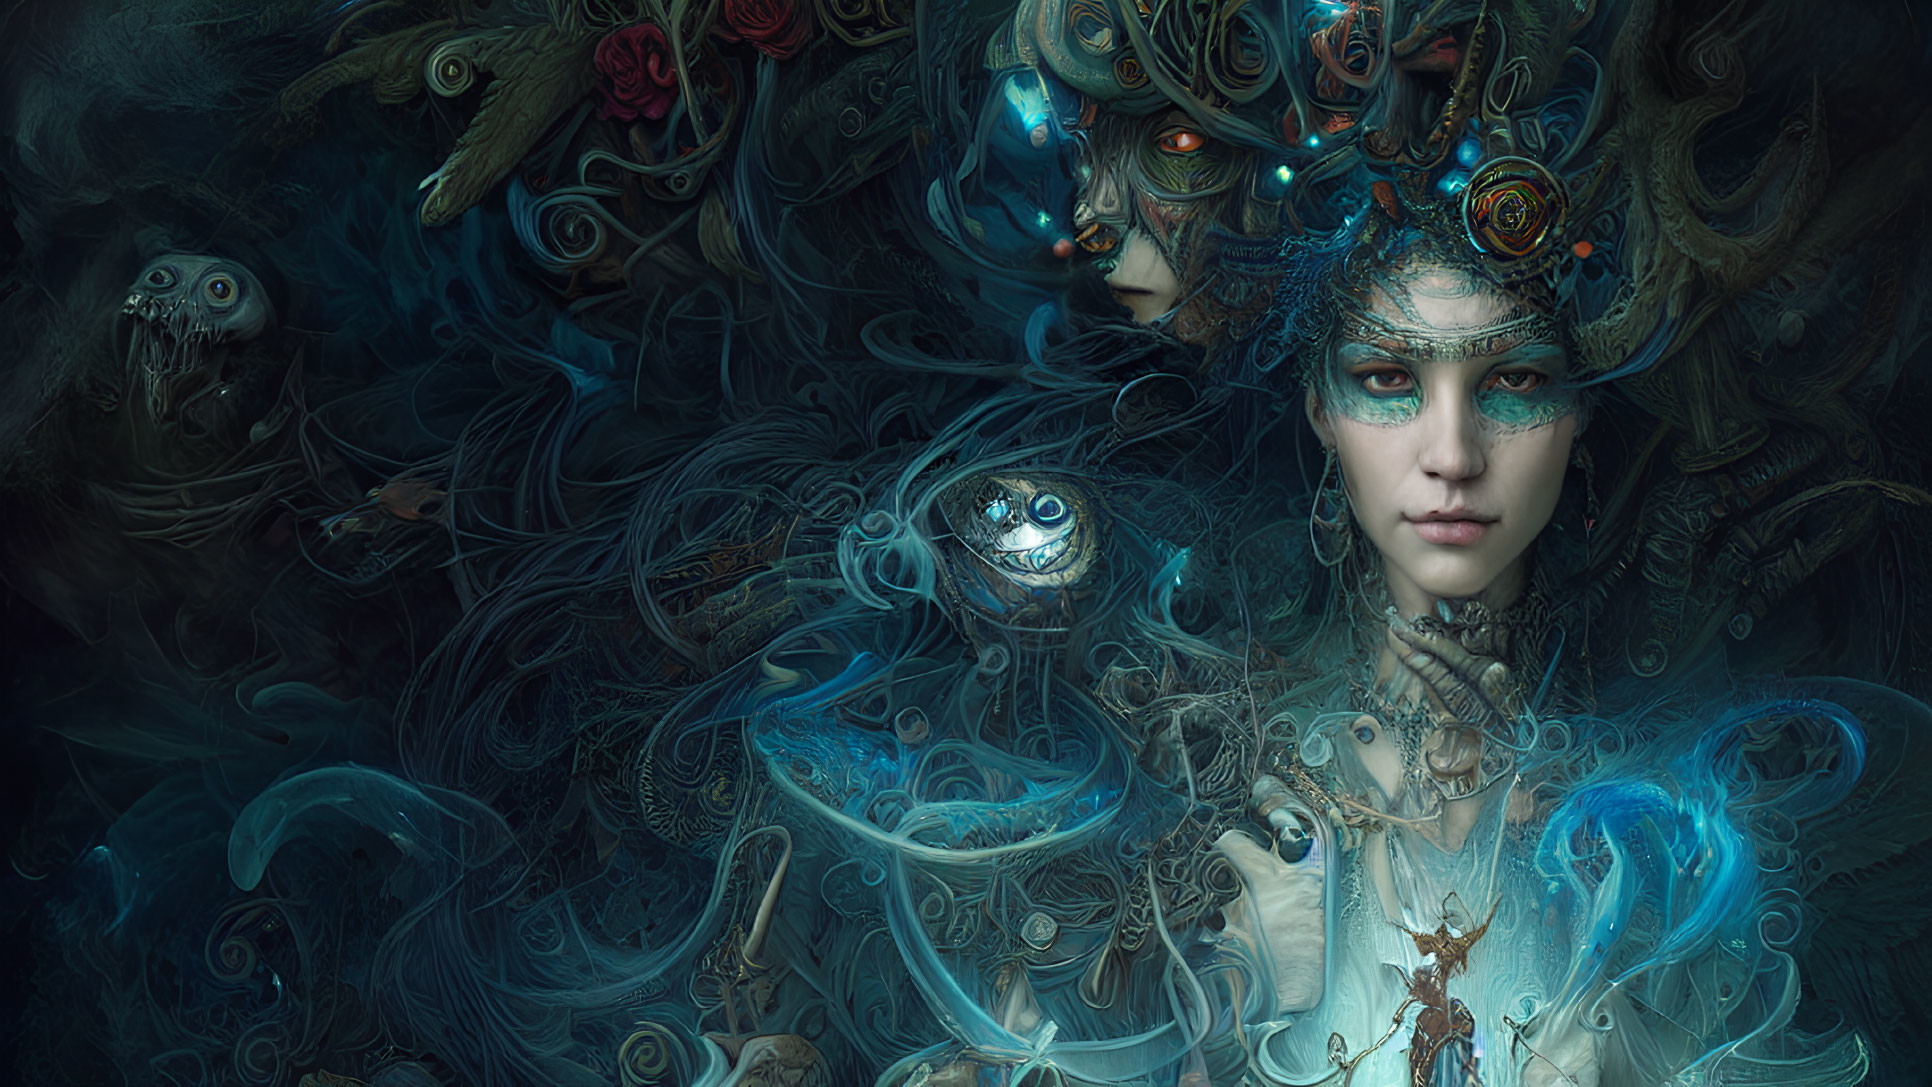 Fantastical digital art: Pale woman with blue and gold headdresses, surrounded by ethereal tendr